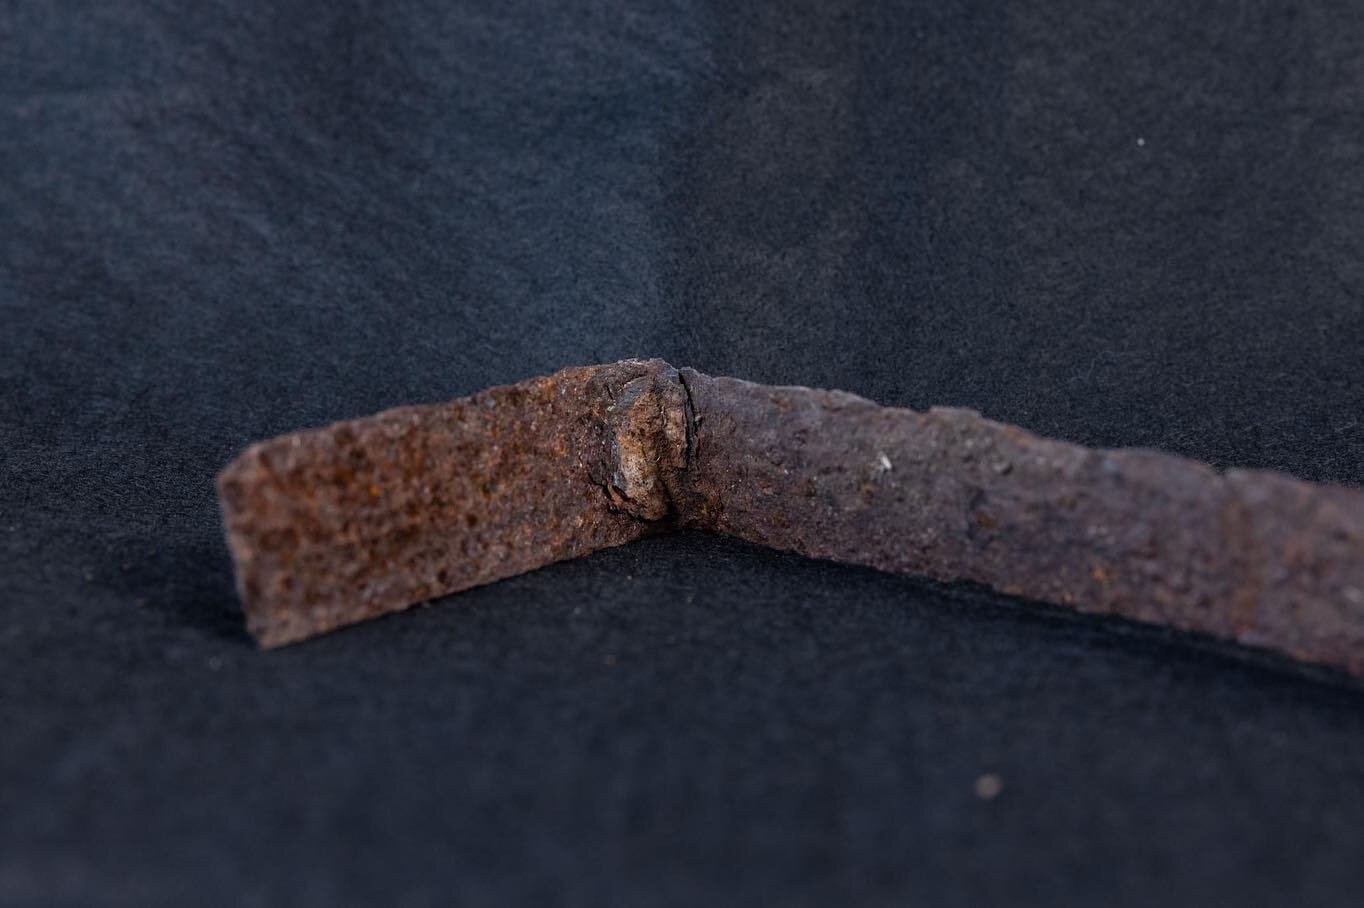 #FridayFind - Wrought Iron Tie-rod!

Now this may just look like a rusty piece of metal to you, but it actually has an important story to tell. 

This artefact is a wrought iron tie-rod. It is also sometimes referred to as a brick strap. Tie-rods wer